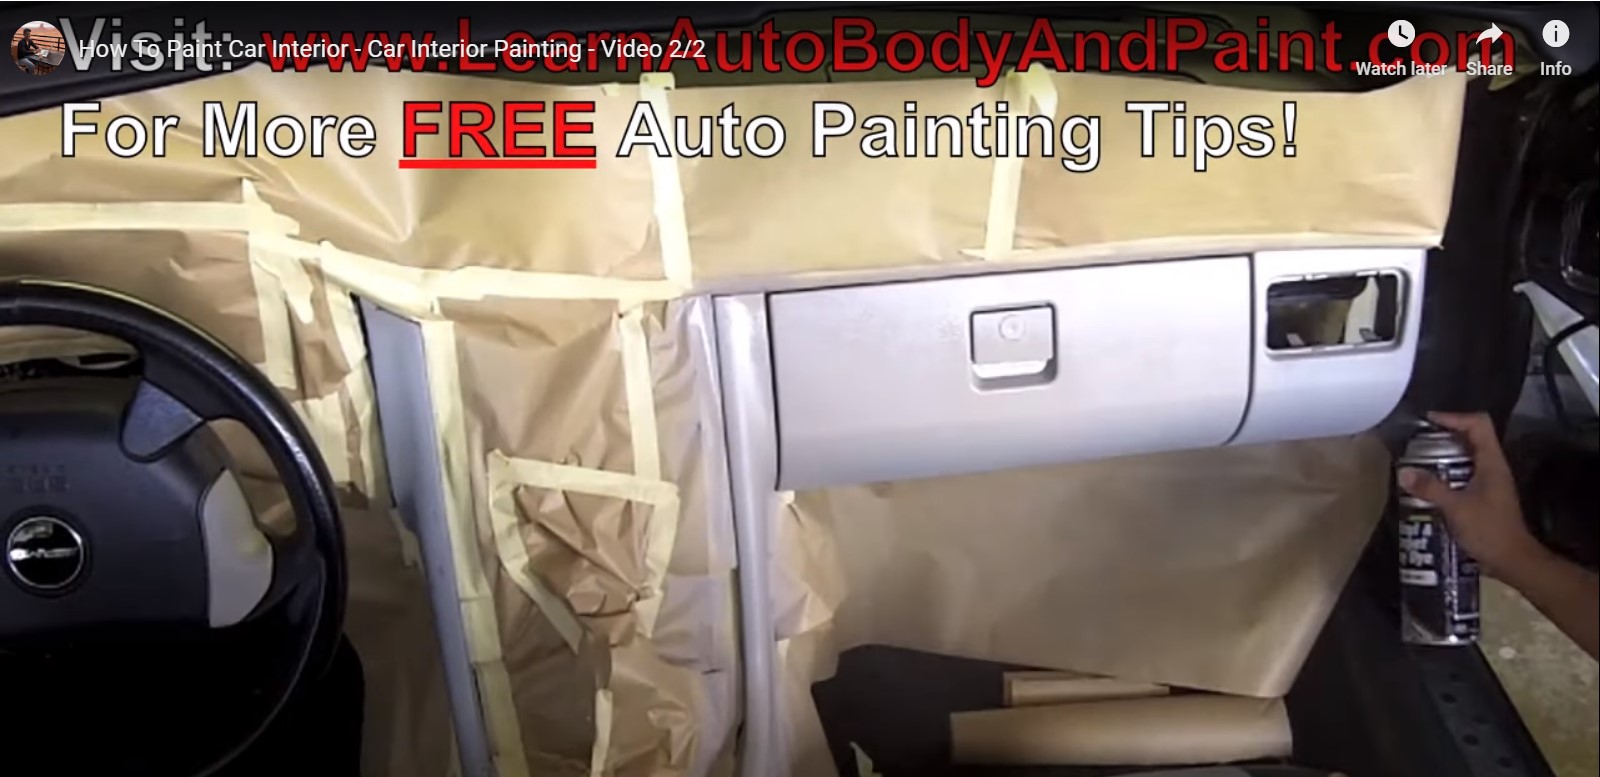 How To Paint Your Car Interior Painting Tips